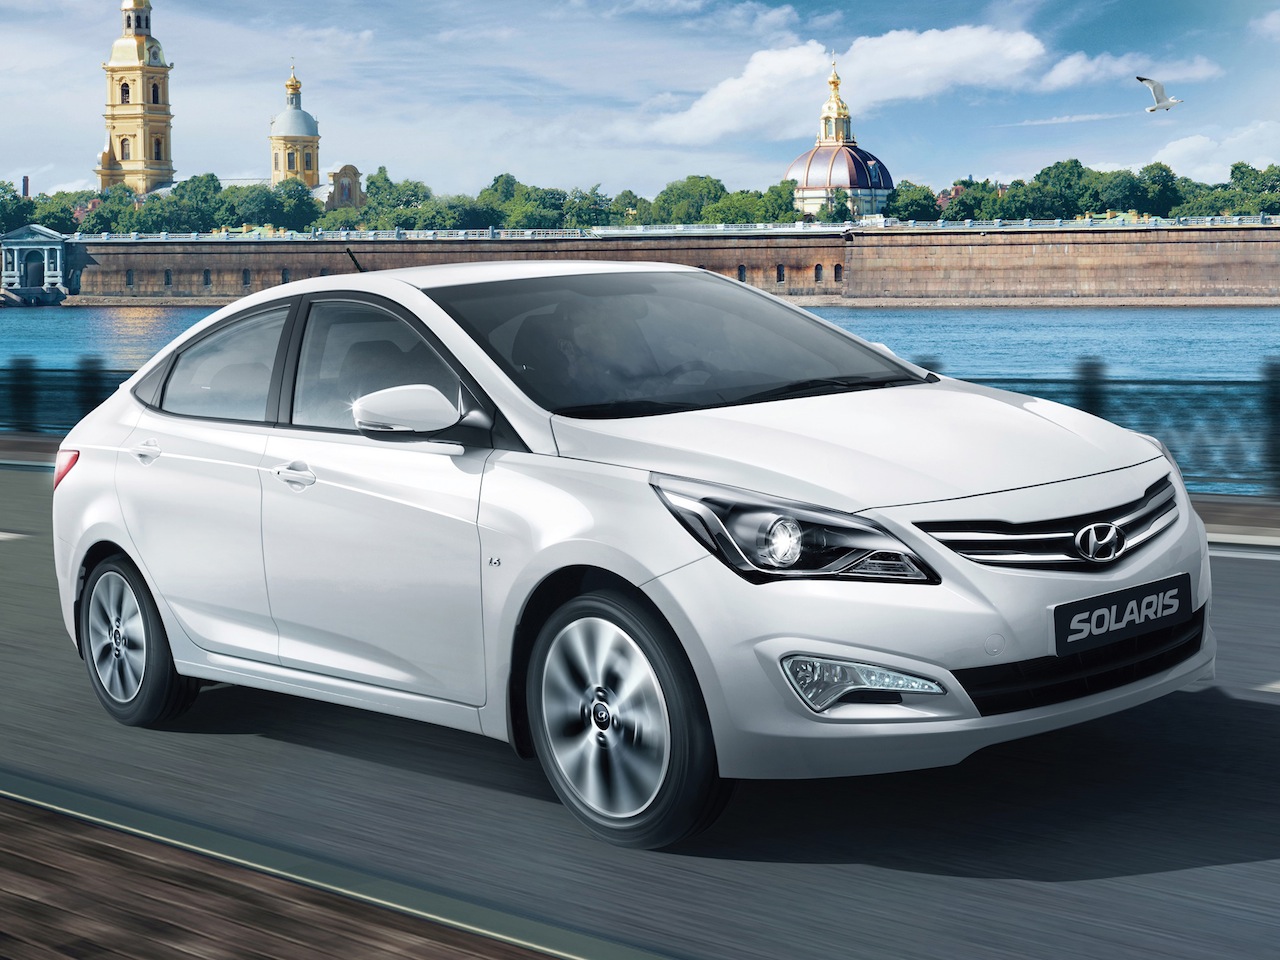 Hyundai Verna facelift late to the party?